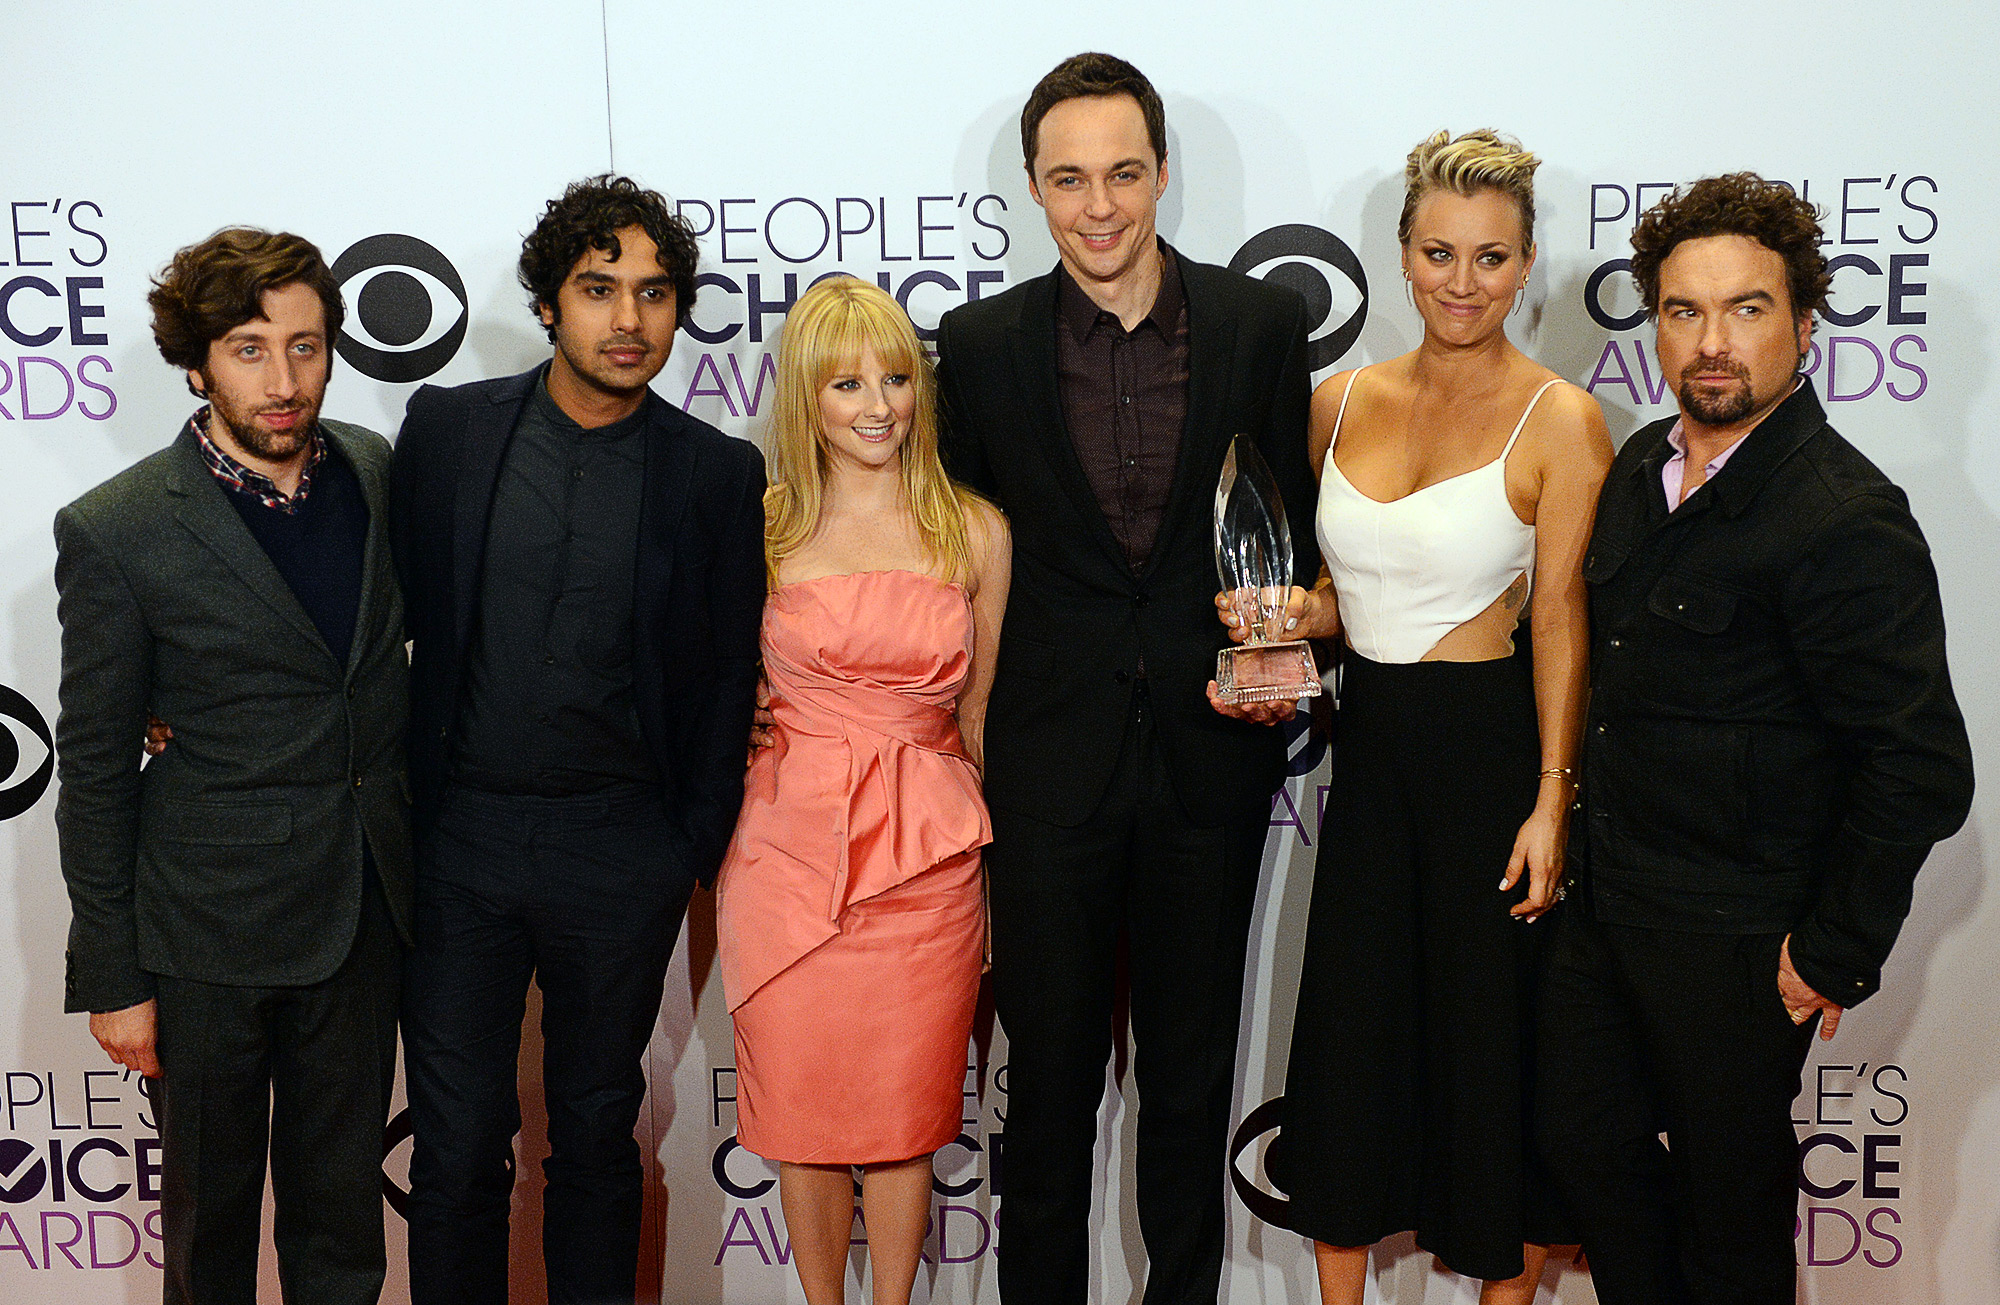 Big Bang Theory' Spinoff Series Is Officially in the Works